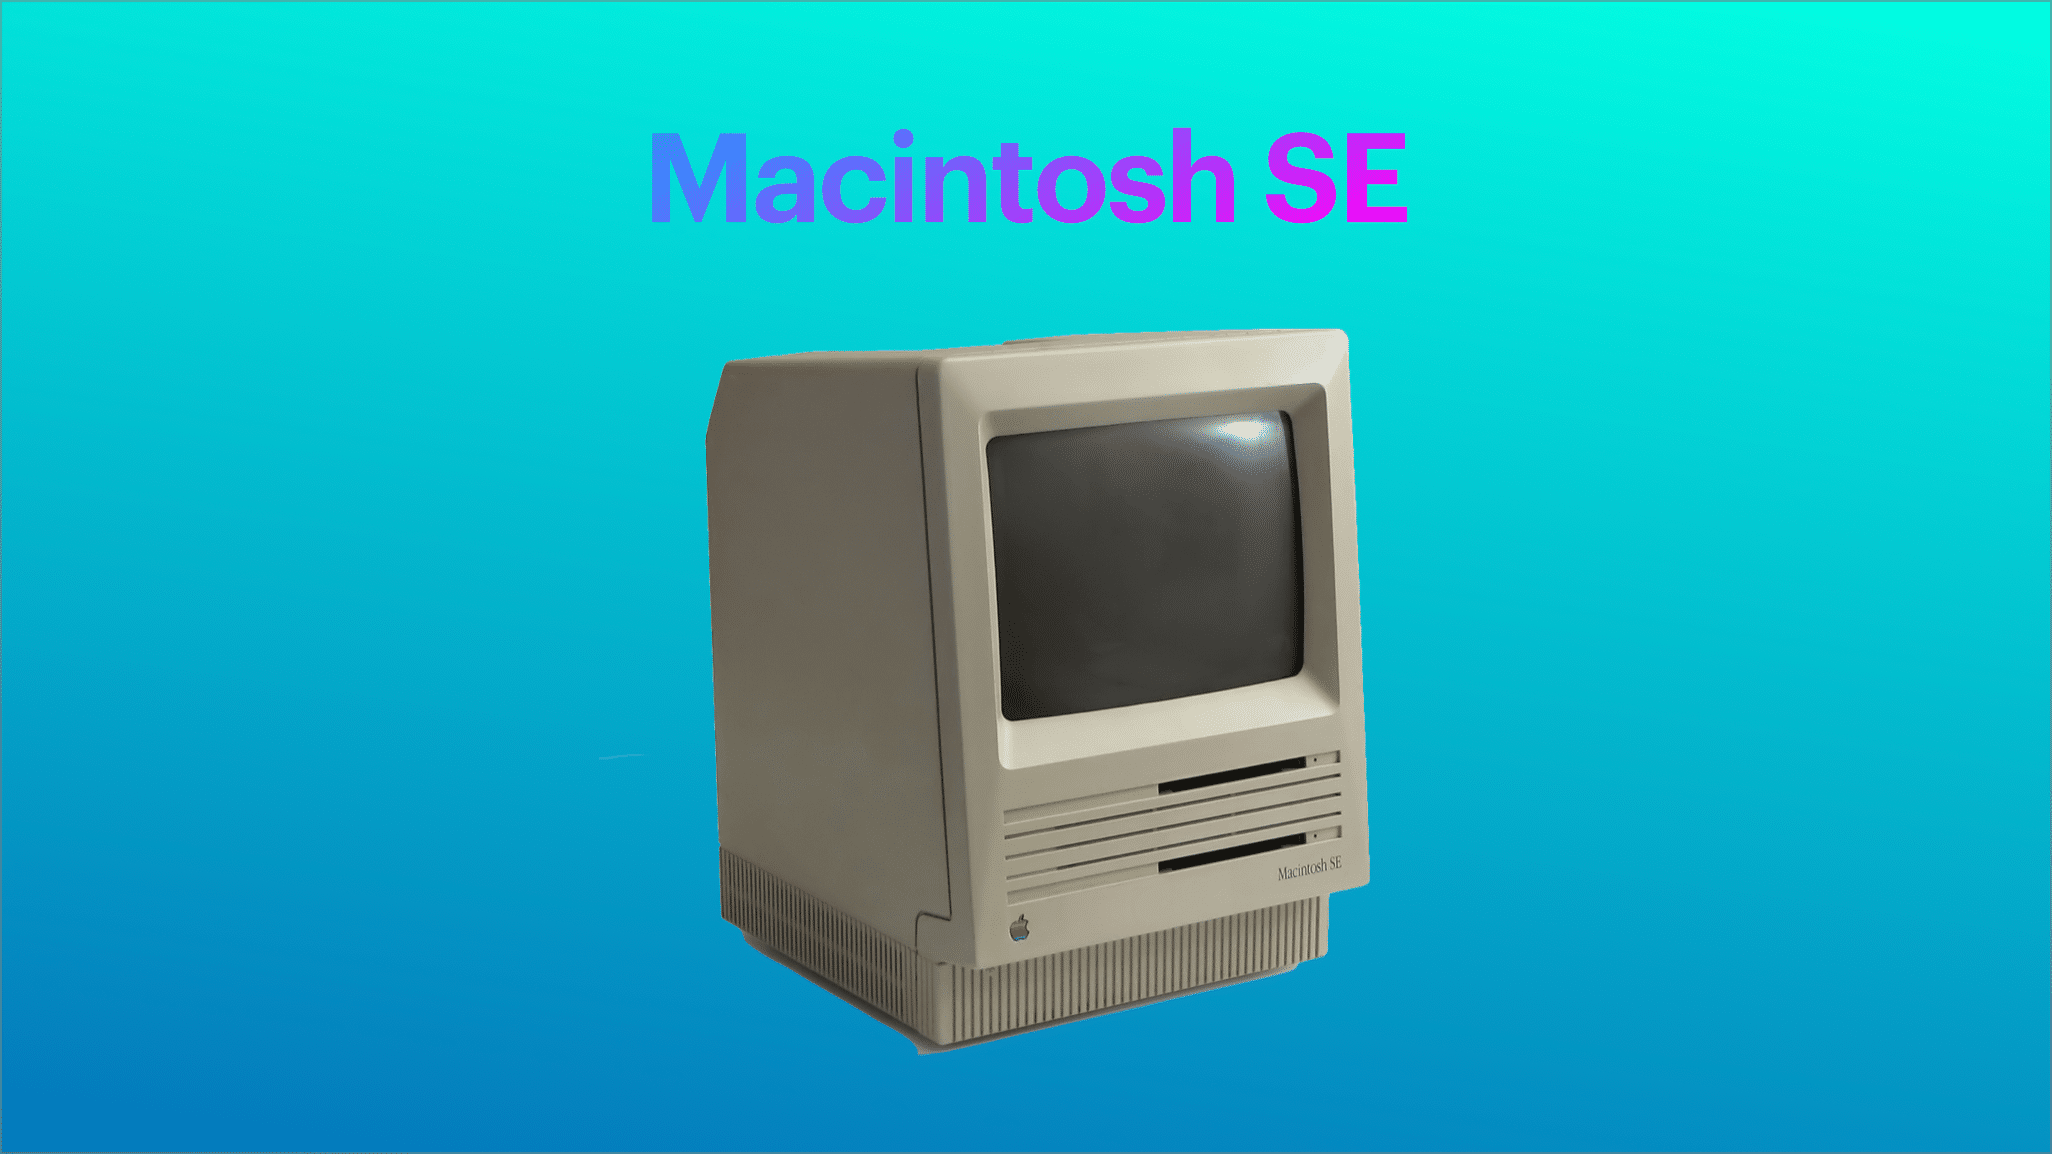 Remembering My Story of Owning a Macintosh SE — 1987-1990